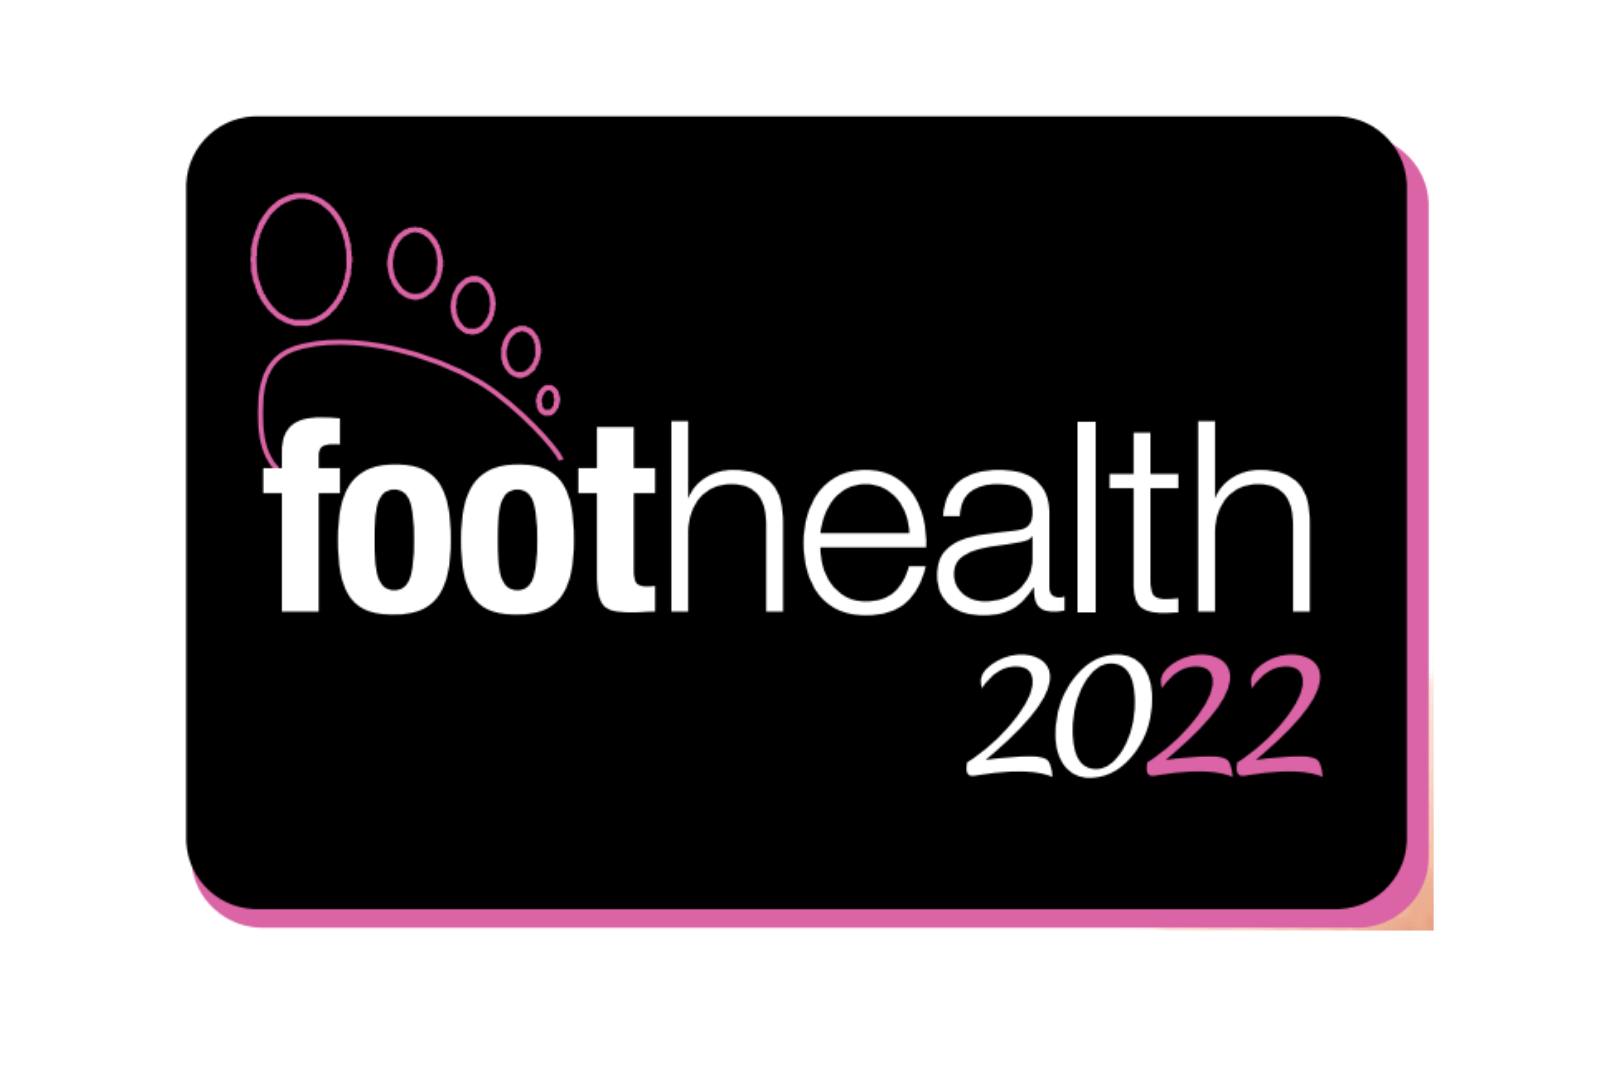 Foothealth Conference 2022